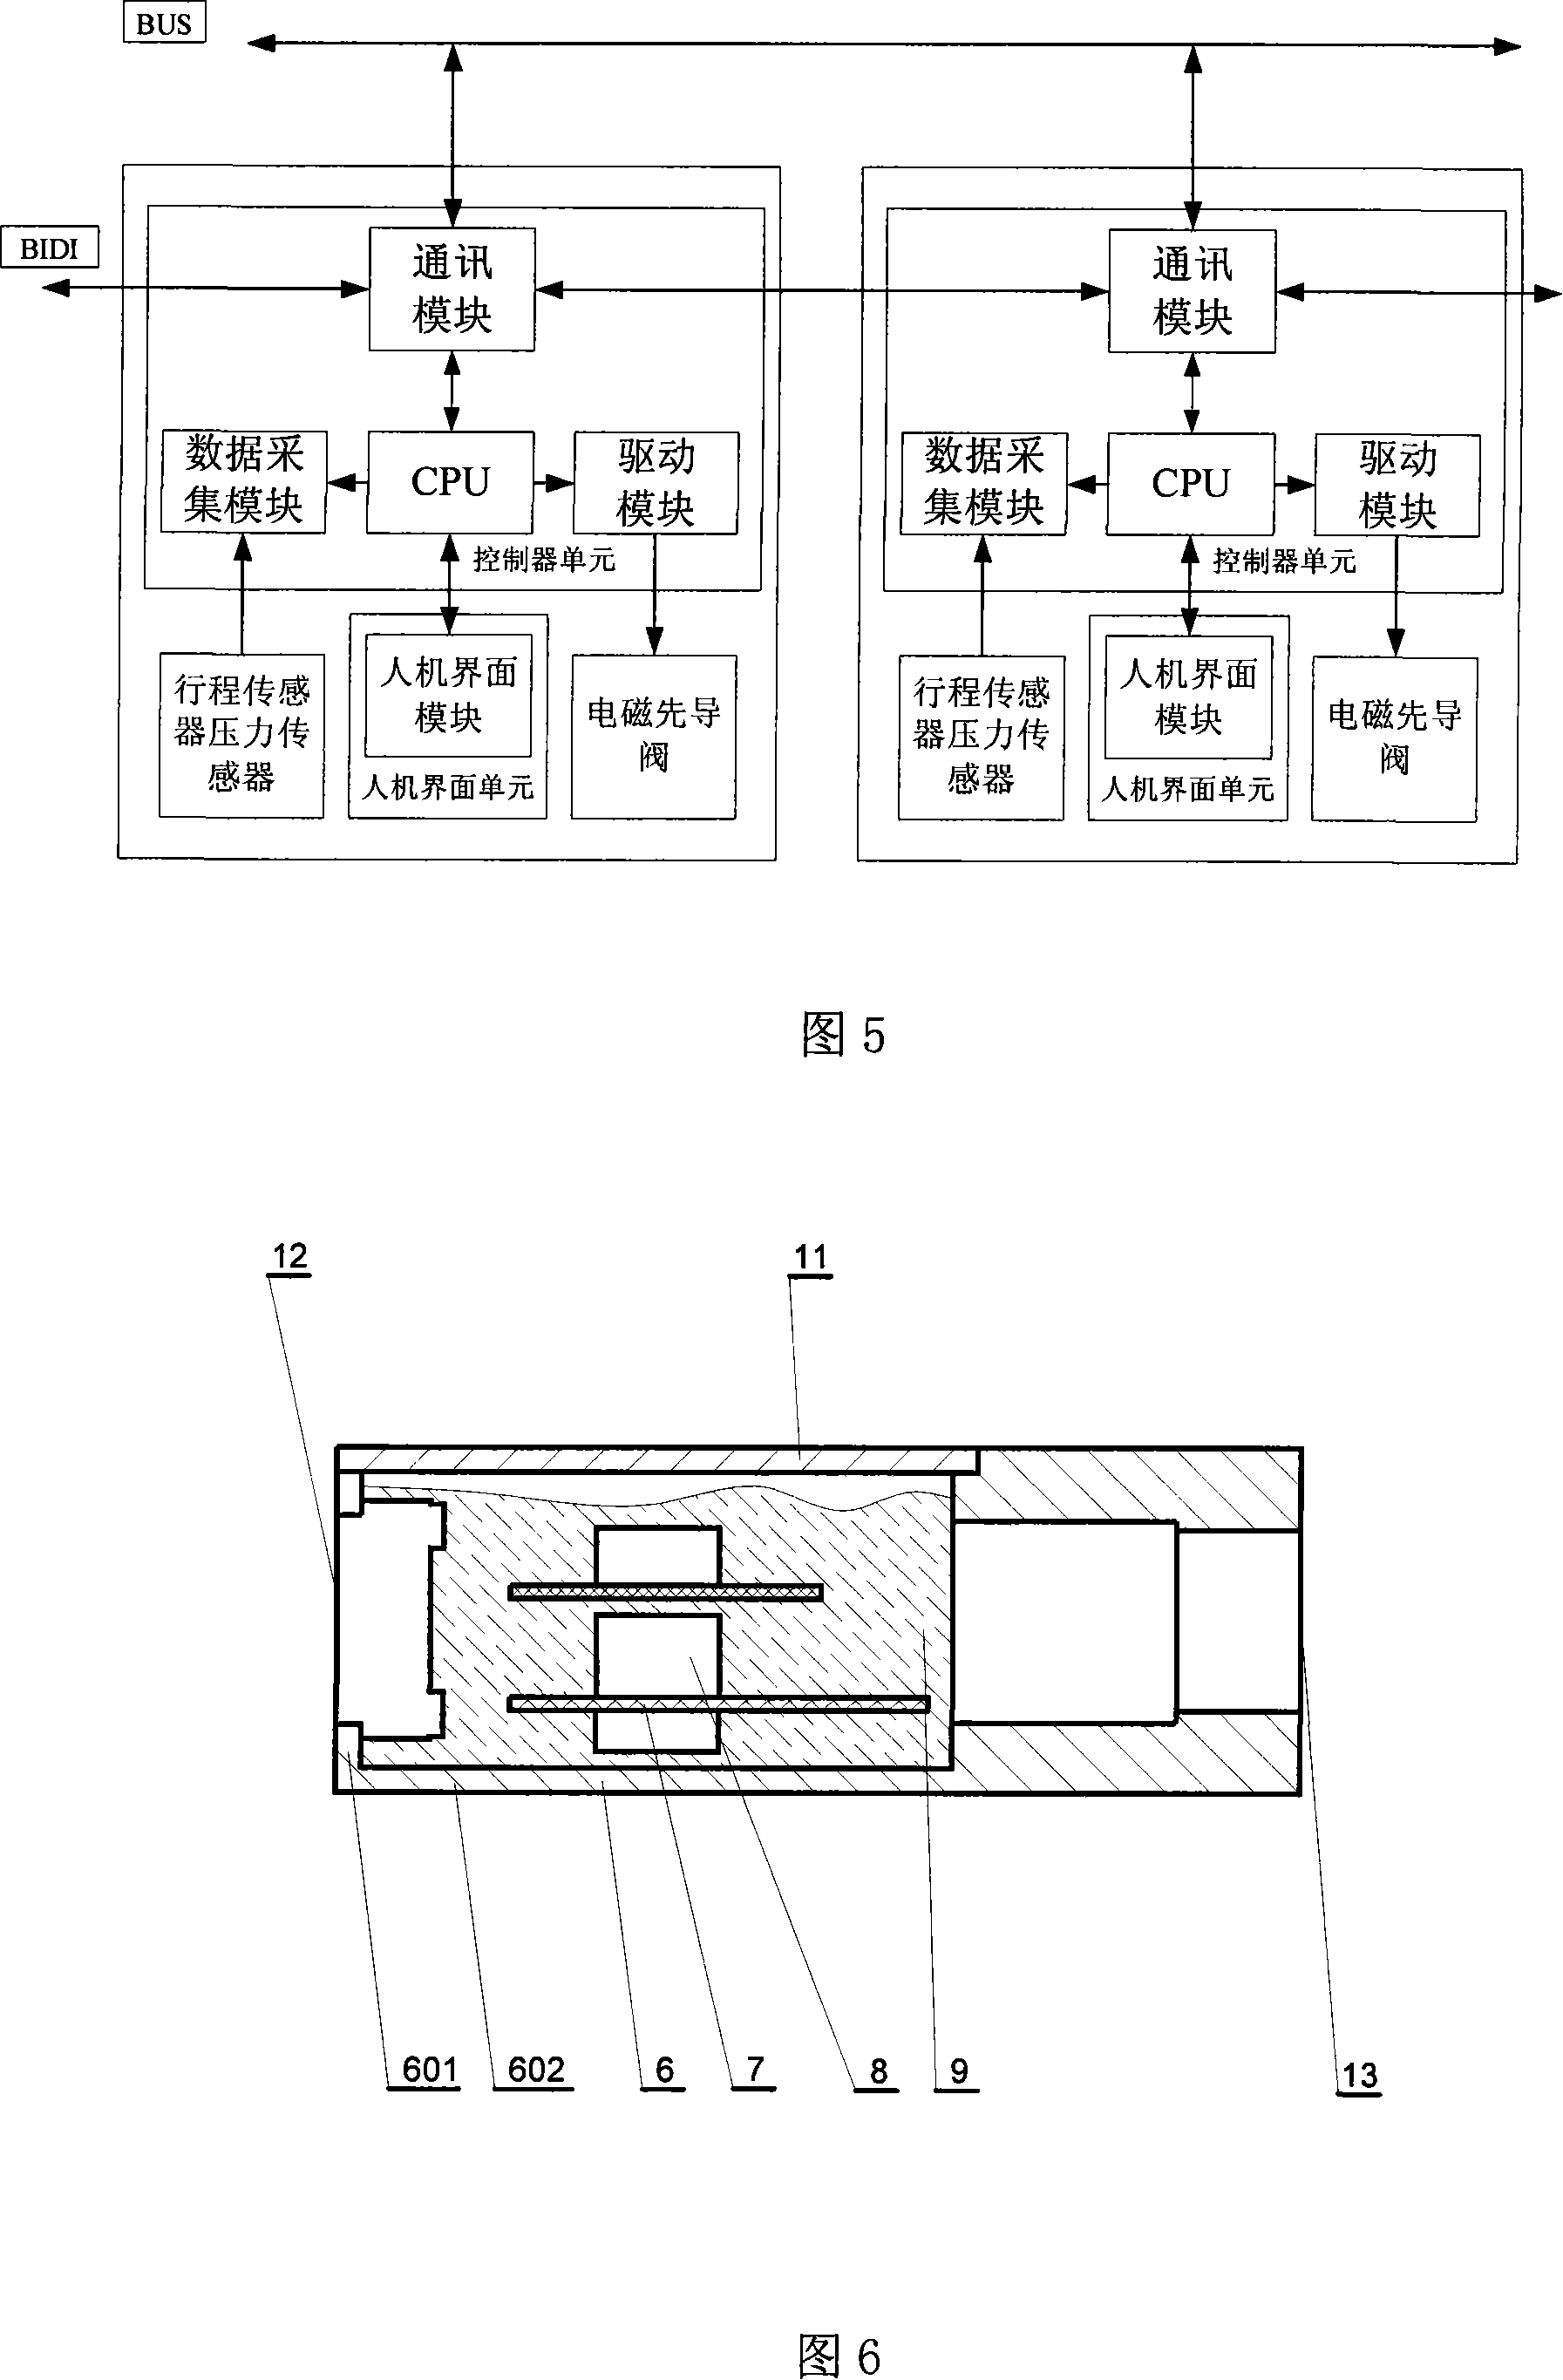 Foreset control device